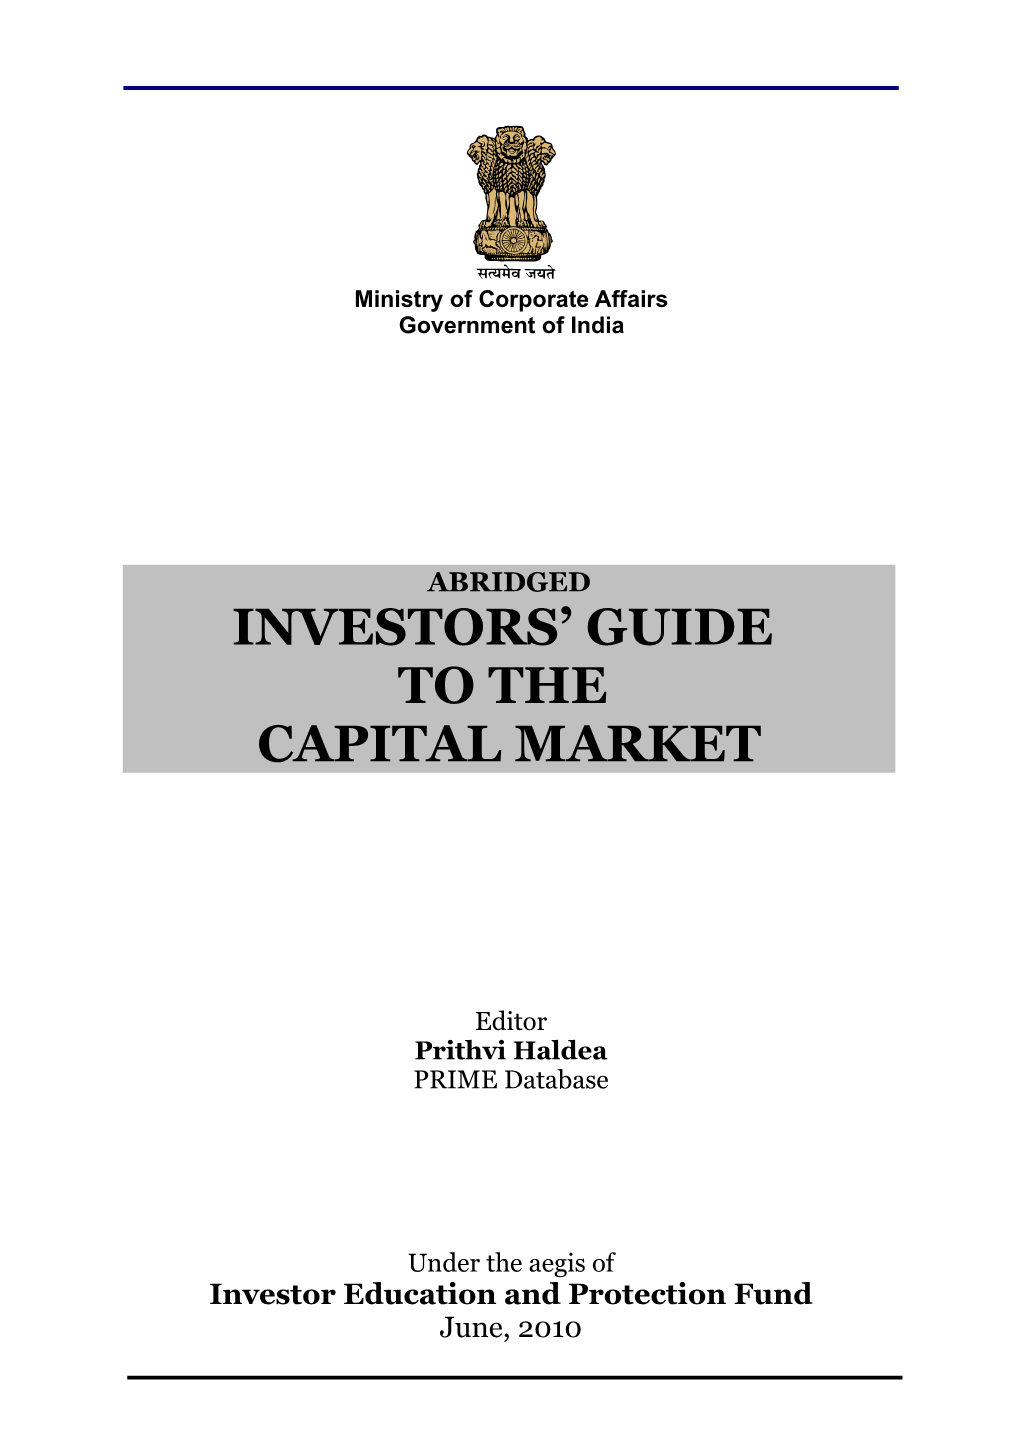 Role of Capital Market*